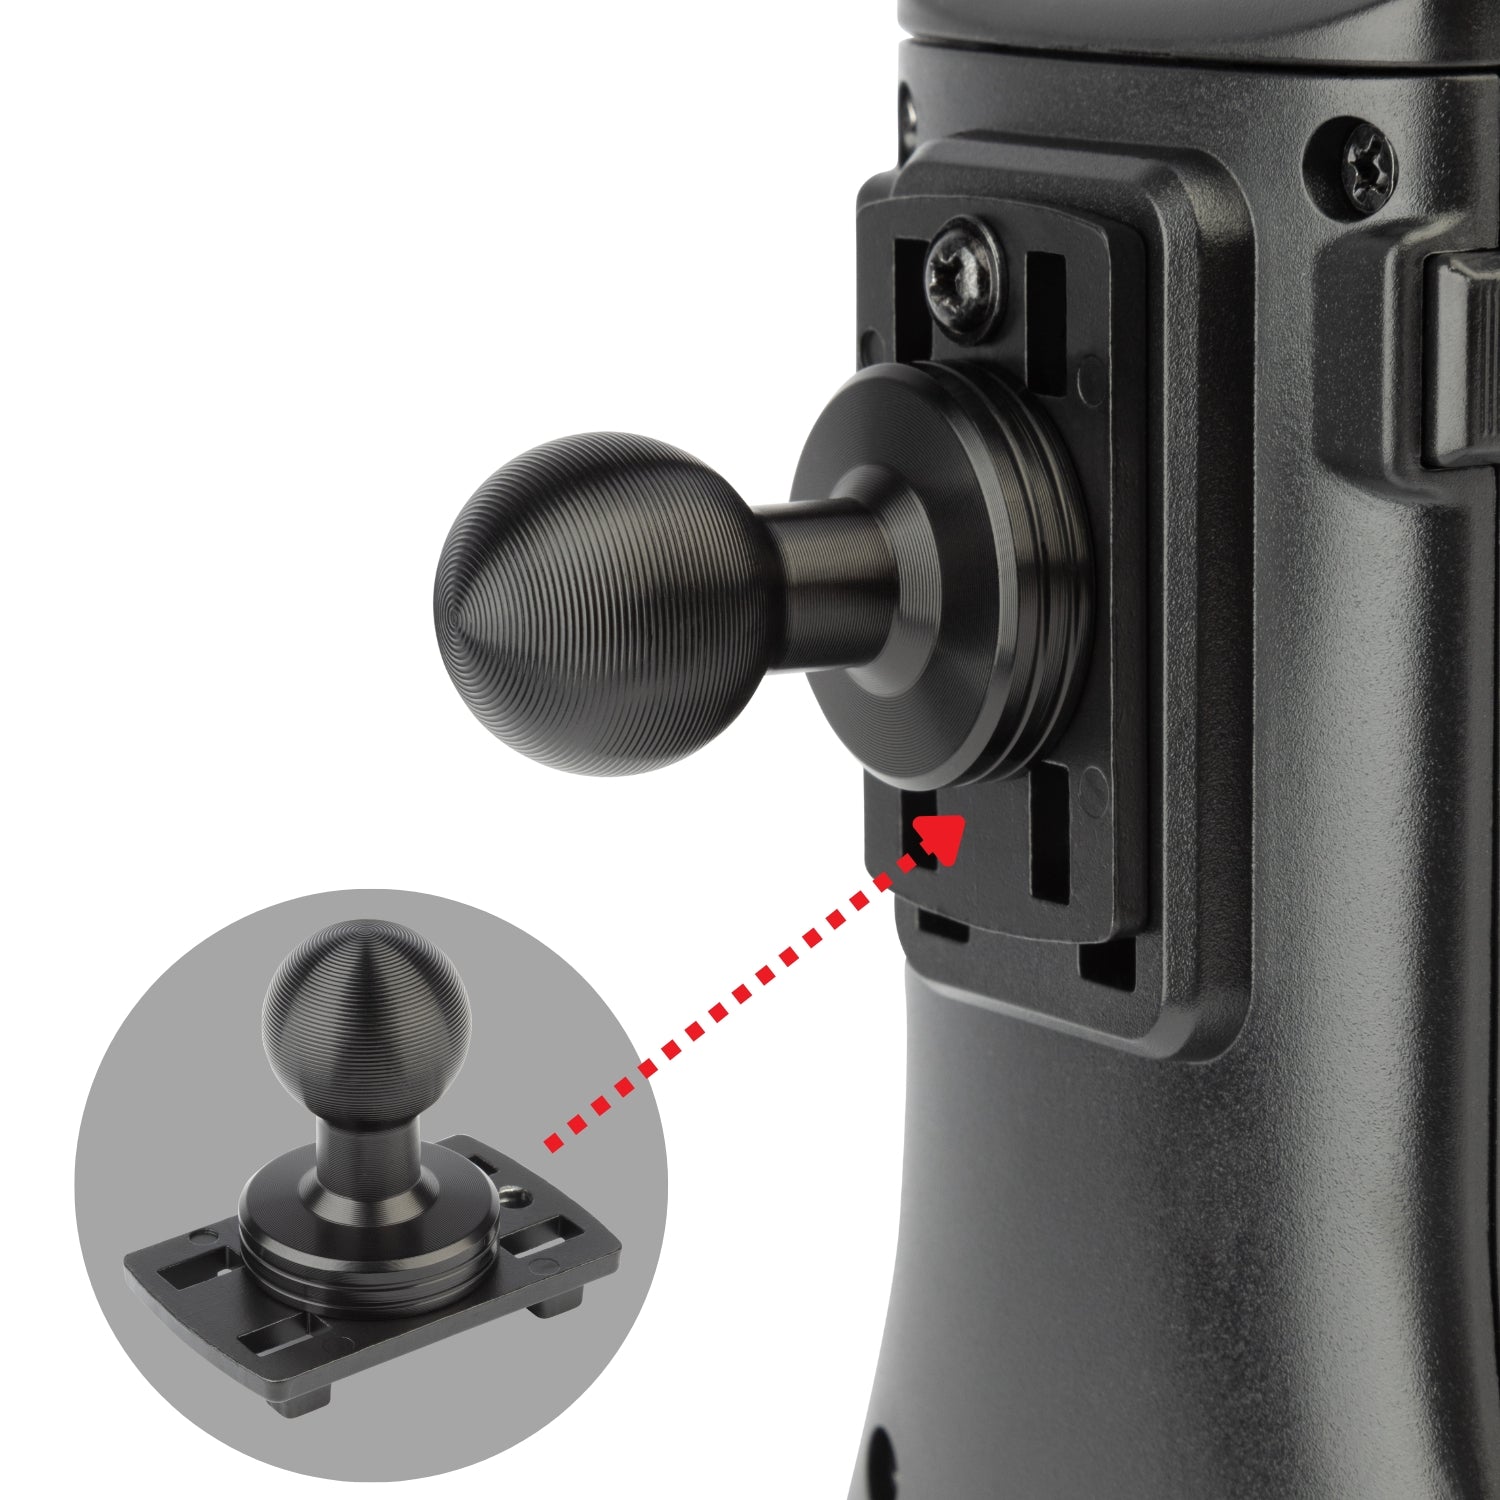 Action Camera GoPro Mount with Integrated 20mm Ball - Bulletpoint Mounting  Solutions